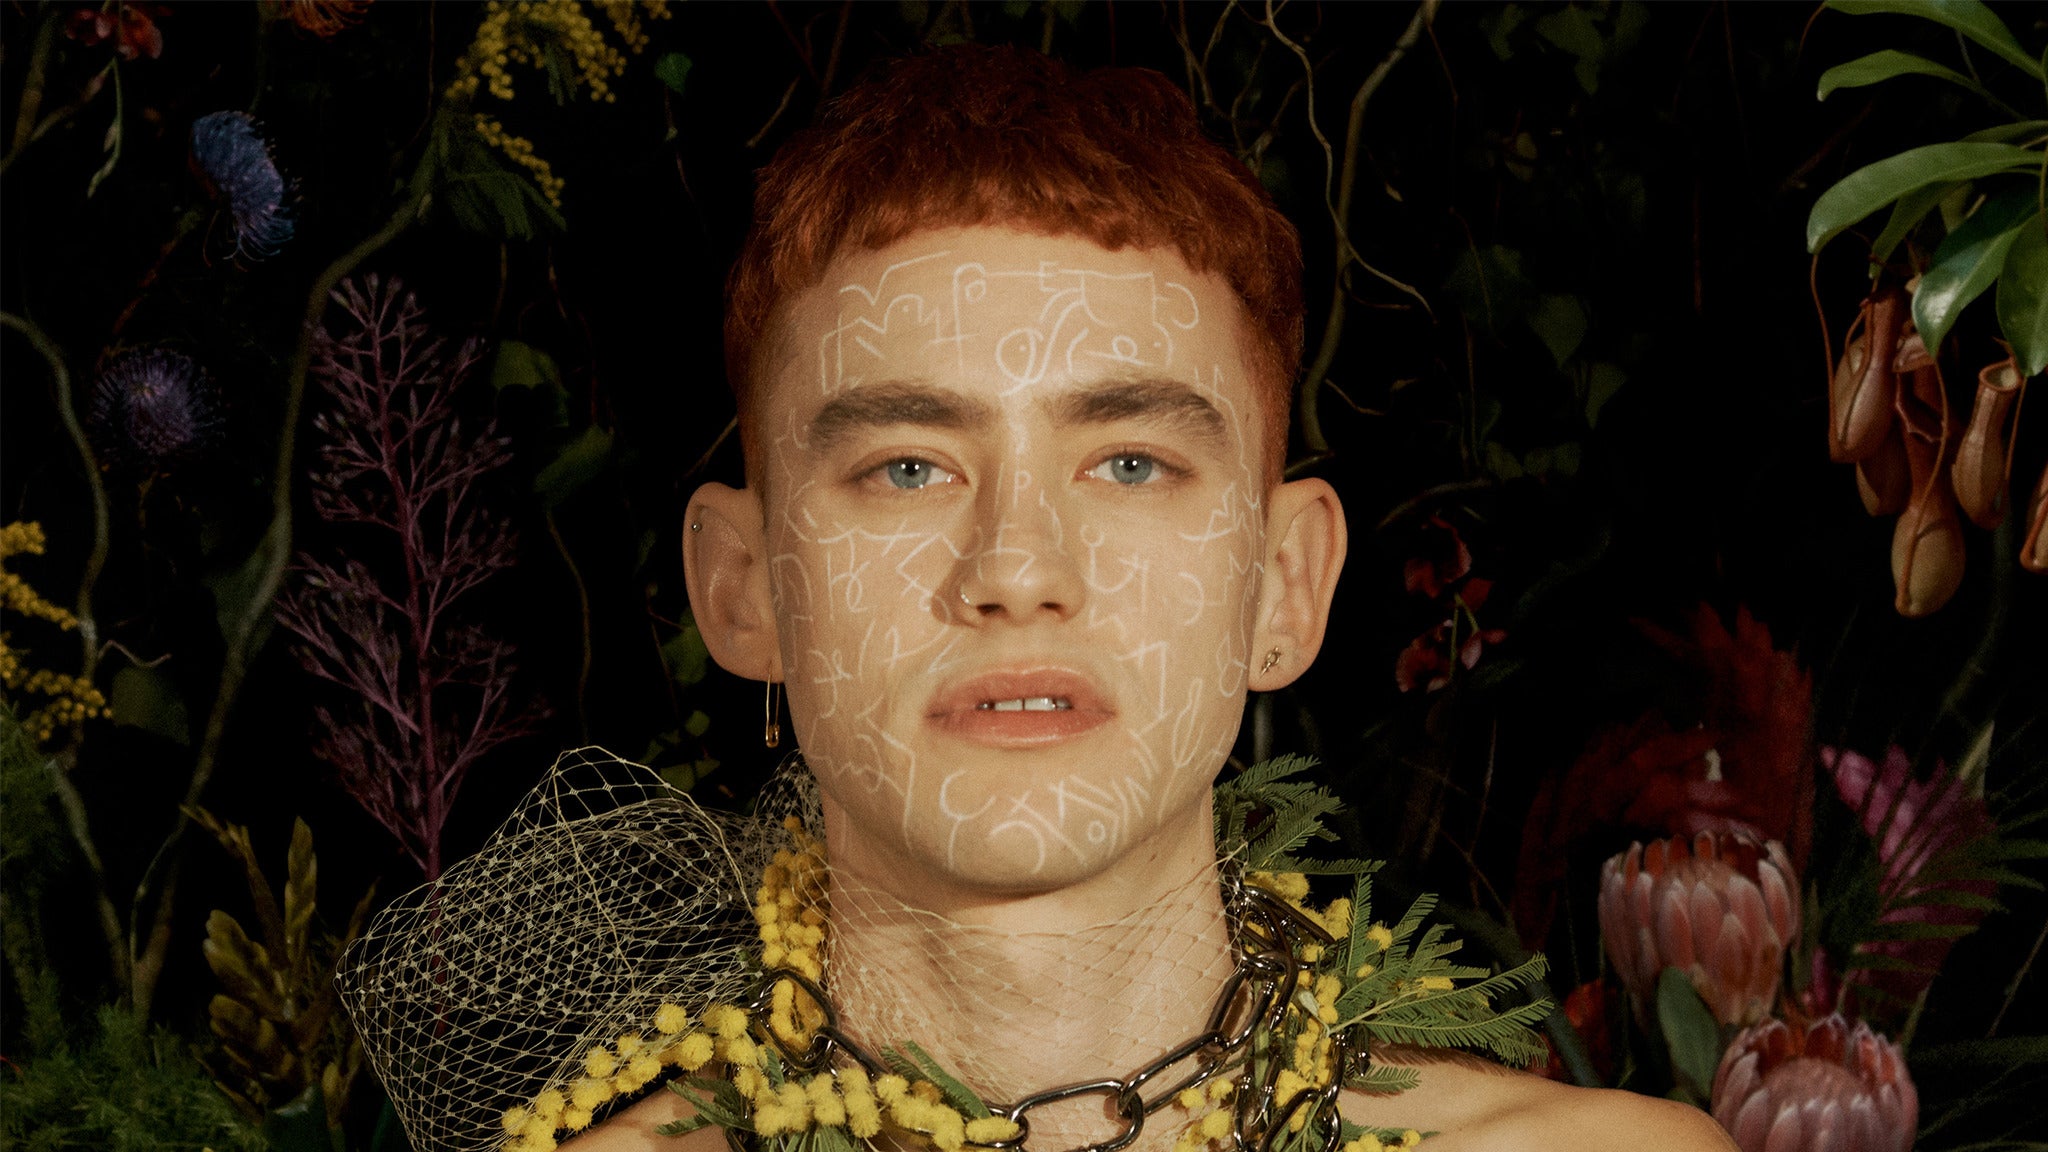 Years & Years in Los Angeles promo photo for Album Pre-Order presale offer code